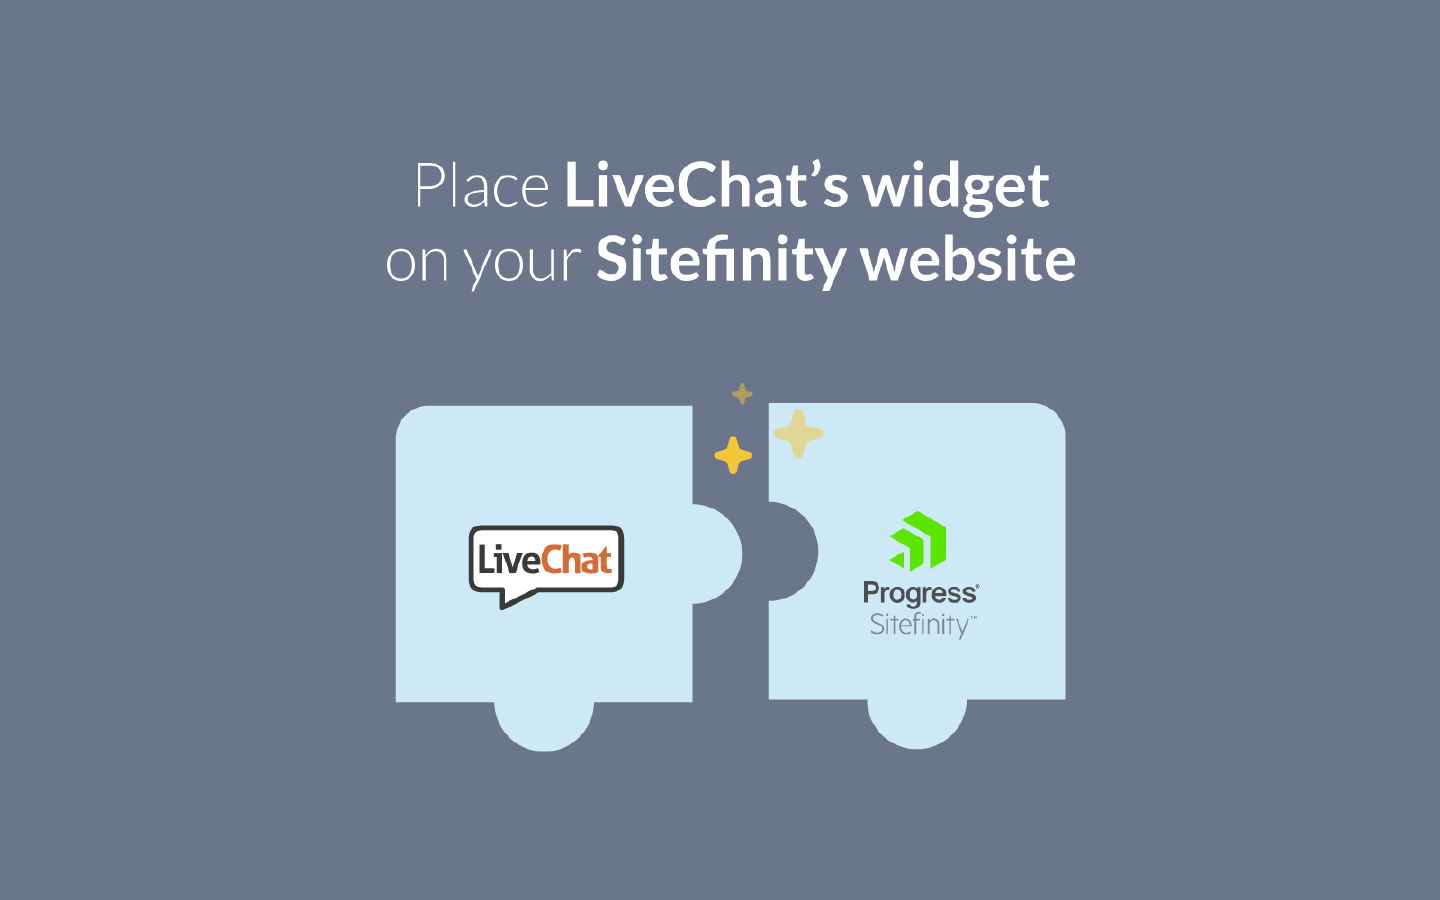 Sign In with your LiveChat account to enable chat. No code needed.